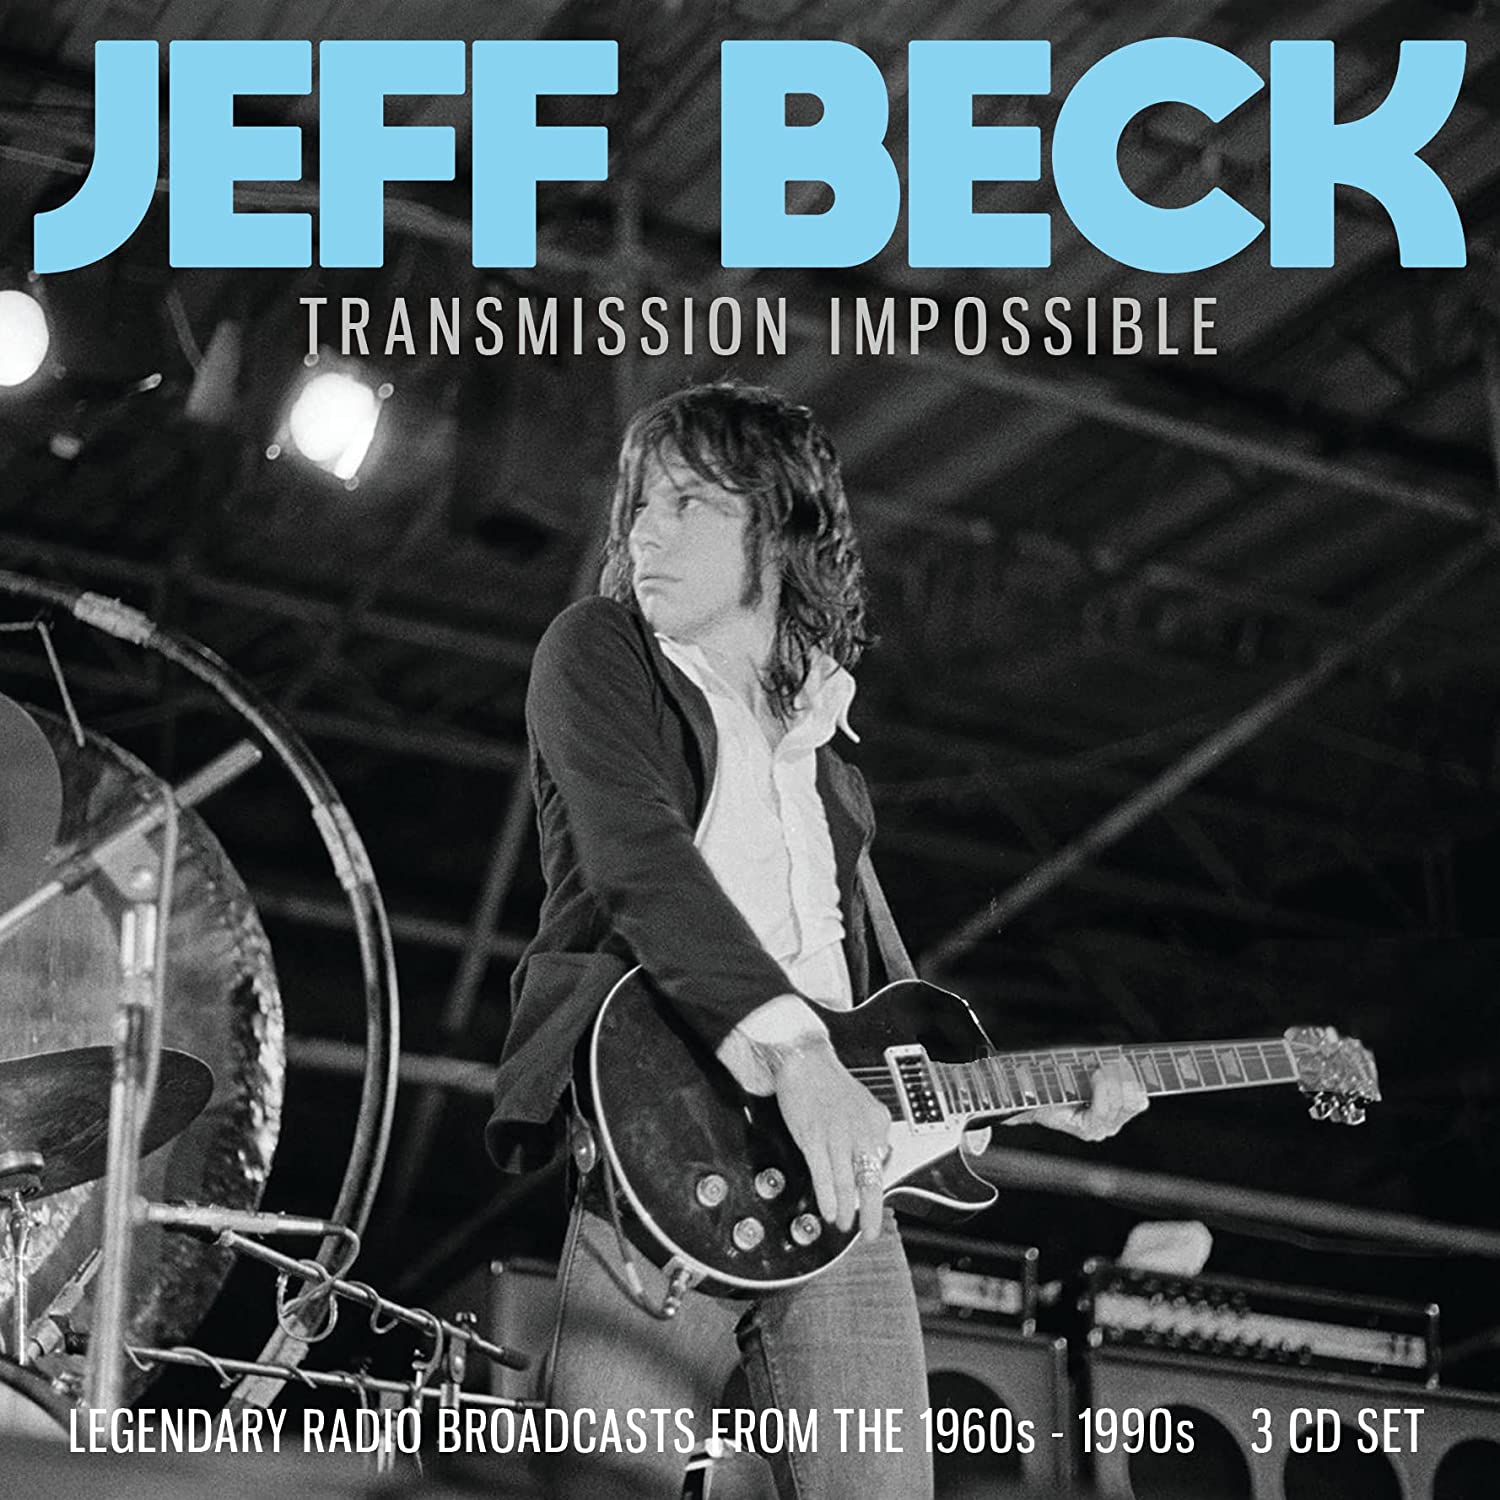 BECK JEFF - Transmission Impossible: Radio Broadcasts from the 1960s-1990s